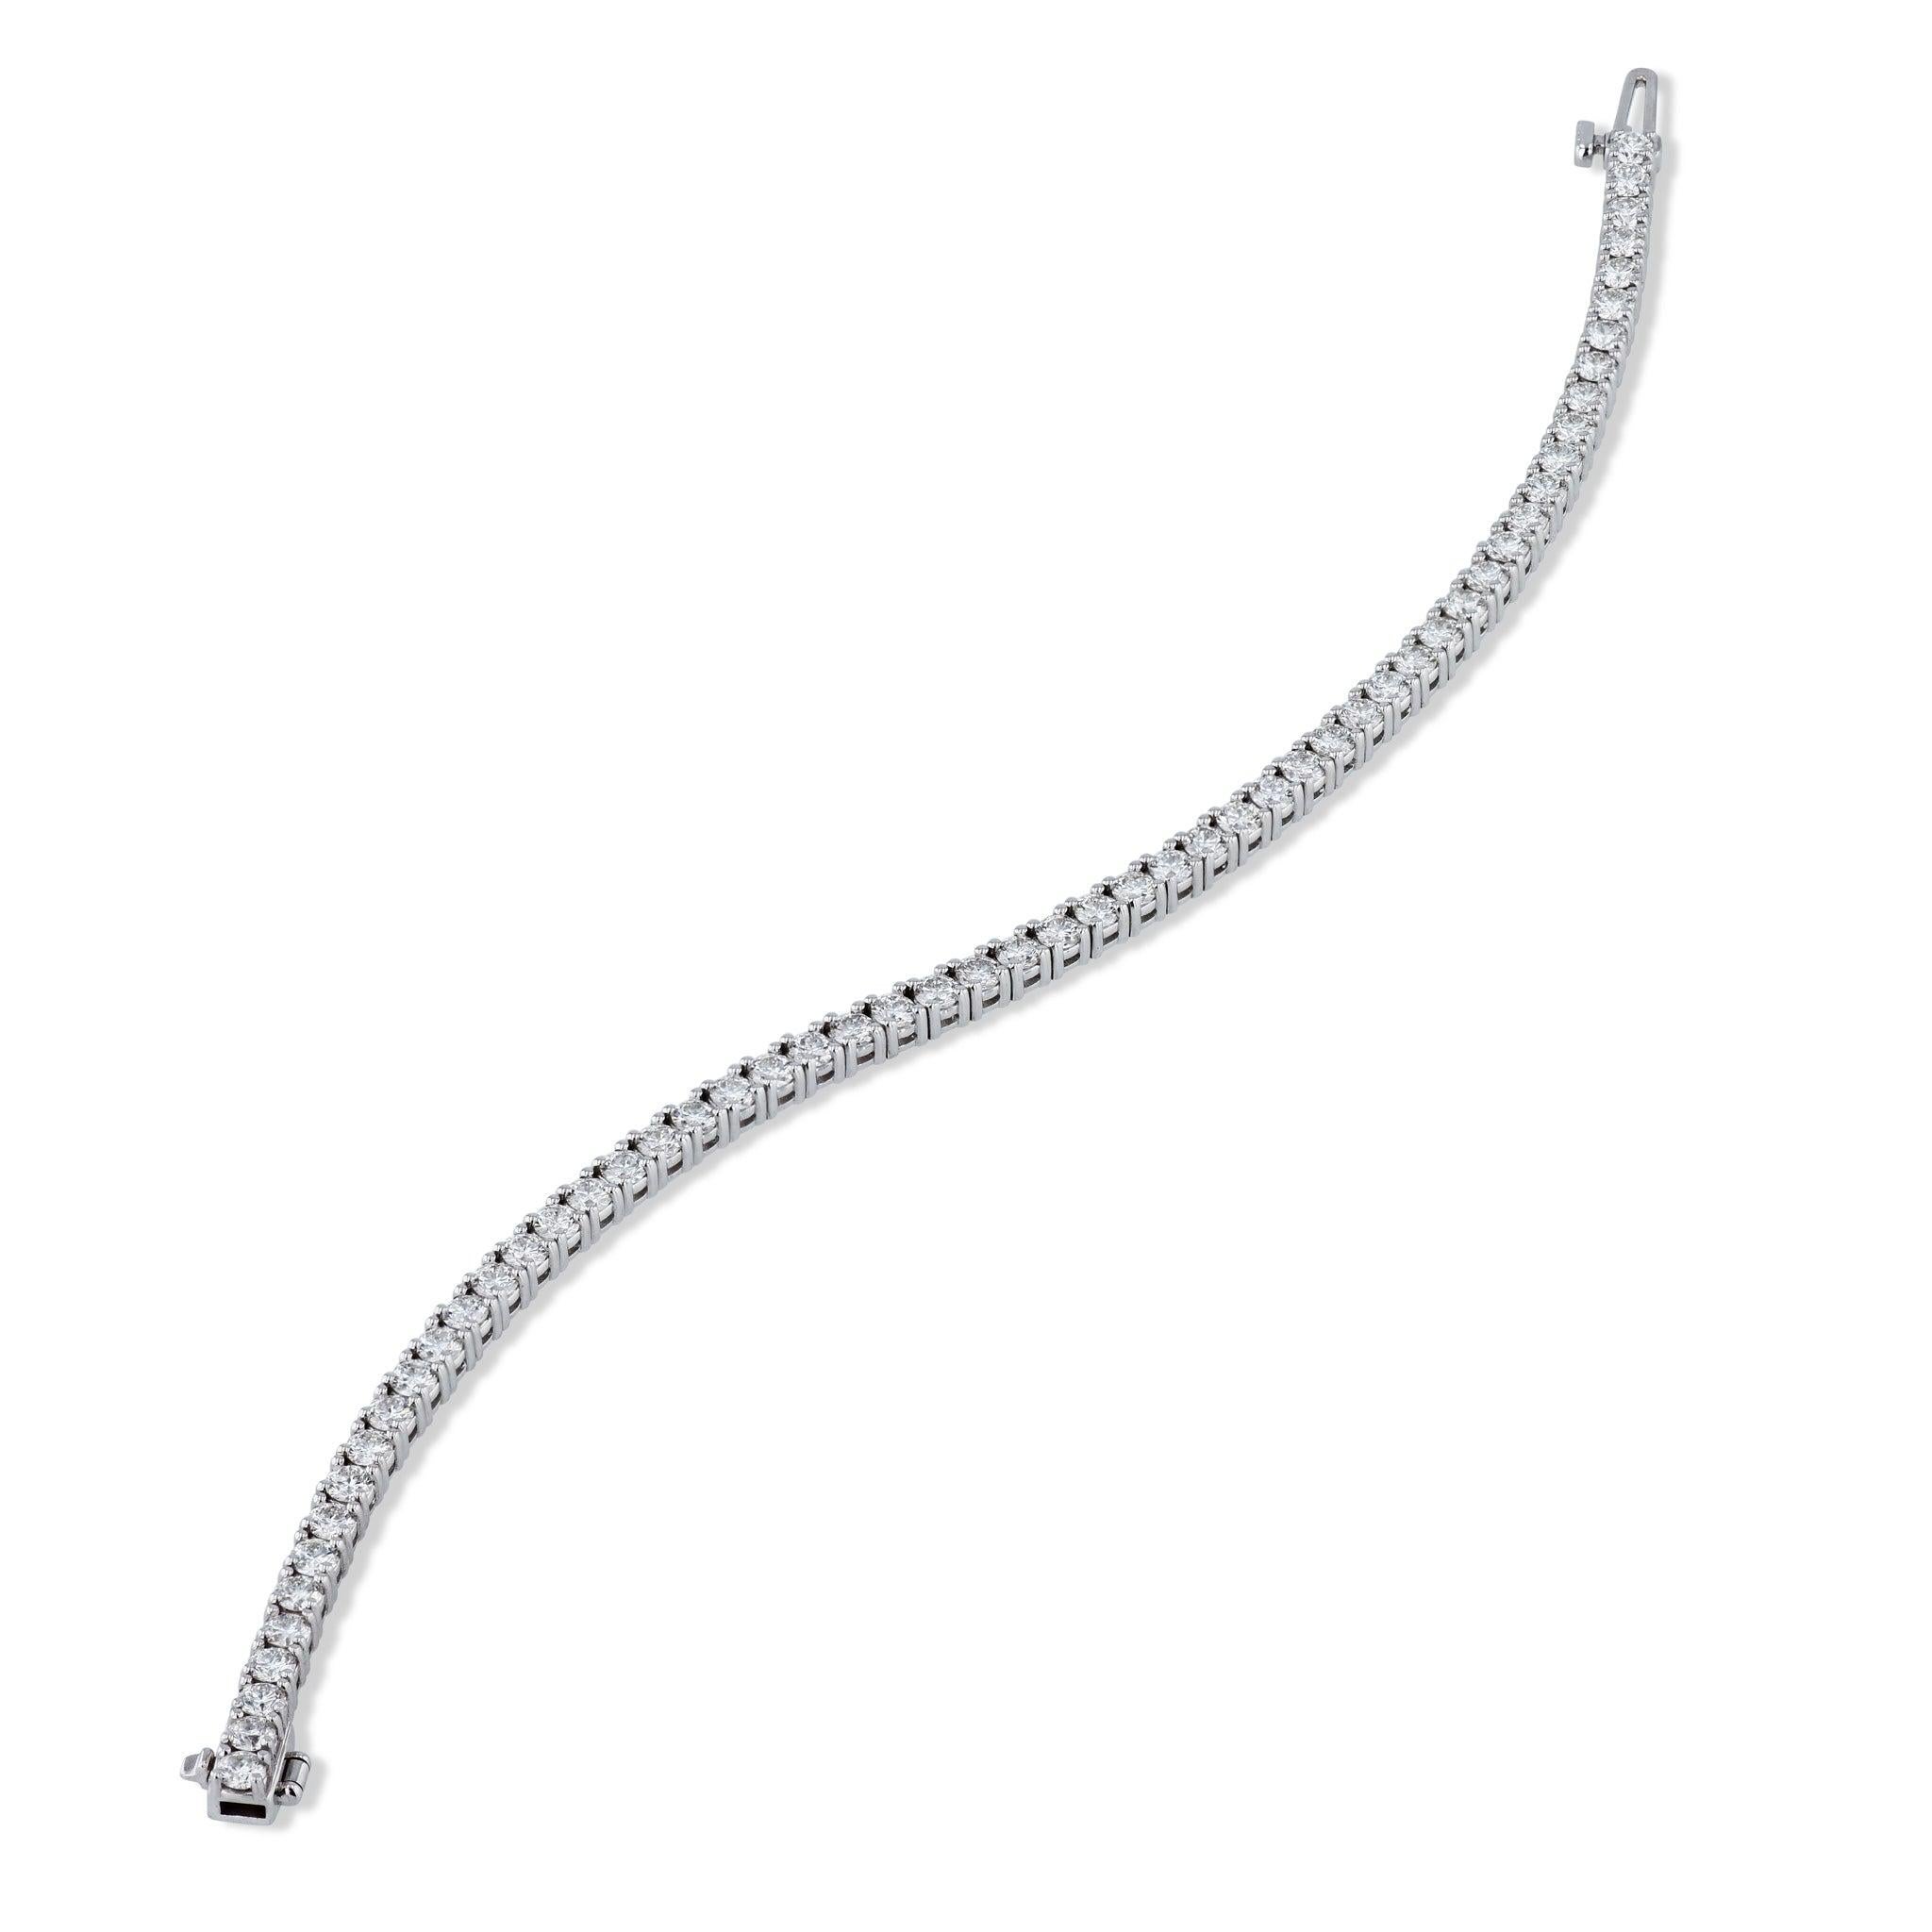 Experience timeless glamour with a stunning Round Brilliant Diamond White Gold Tennis Bracelet. 18kt white gold crafted with 58 pristine round brilliant cut diamonds. Four prong setting for a luxurious look. Handmade by H&H Jewels.
Round Brilliant